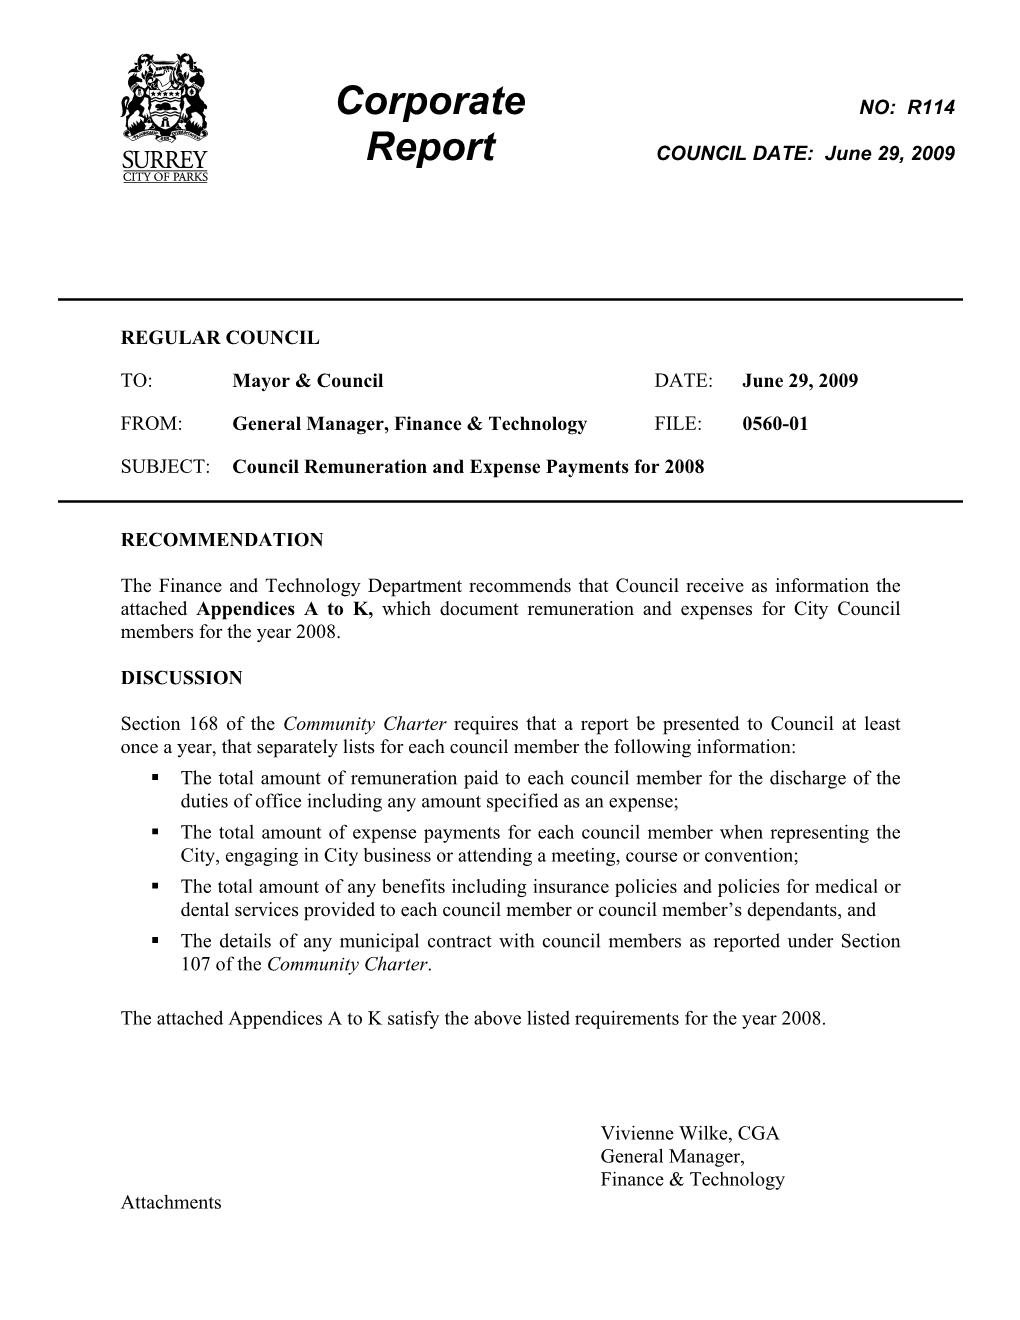 R114: Council Remuneration and Expense Payments for 2008